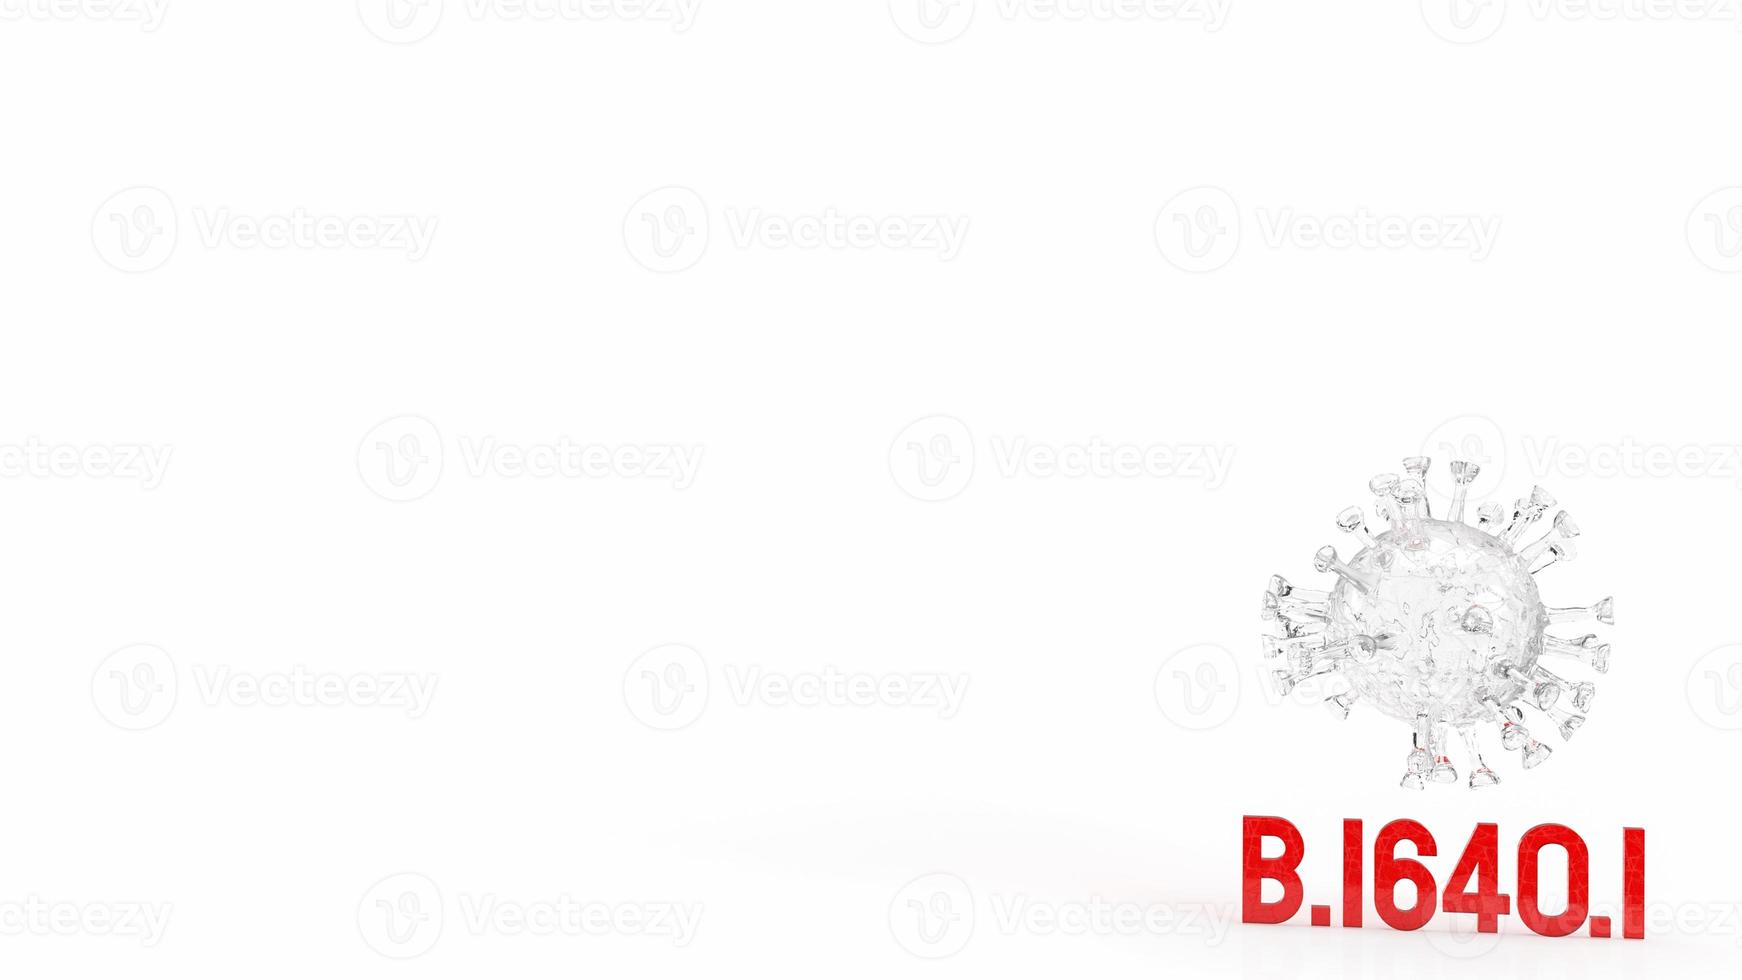 The clear virus and red text b.1640.1 on white background  3d rendering photo